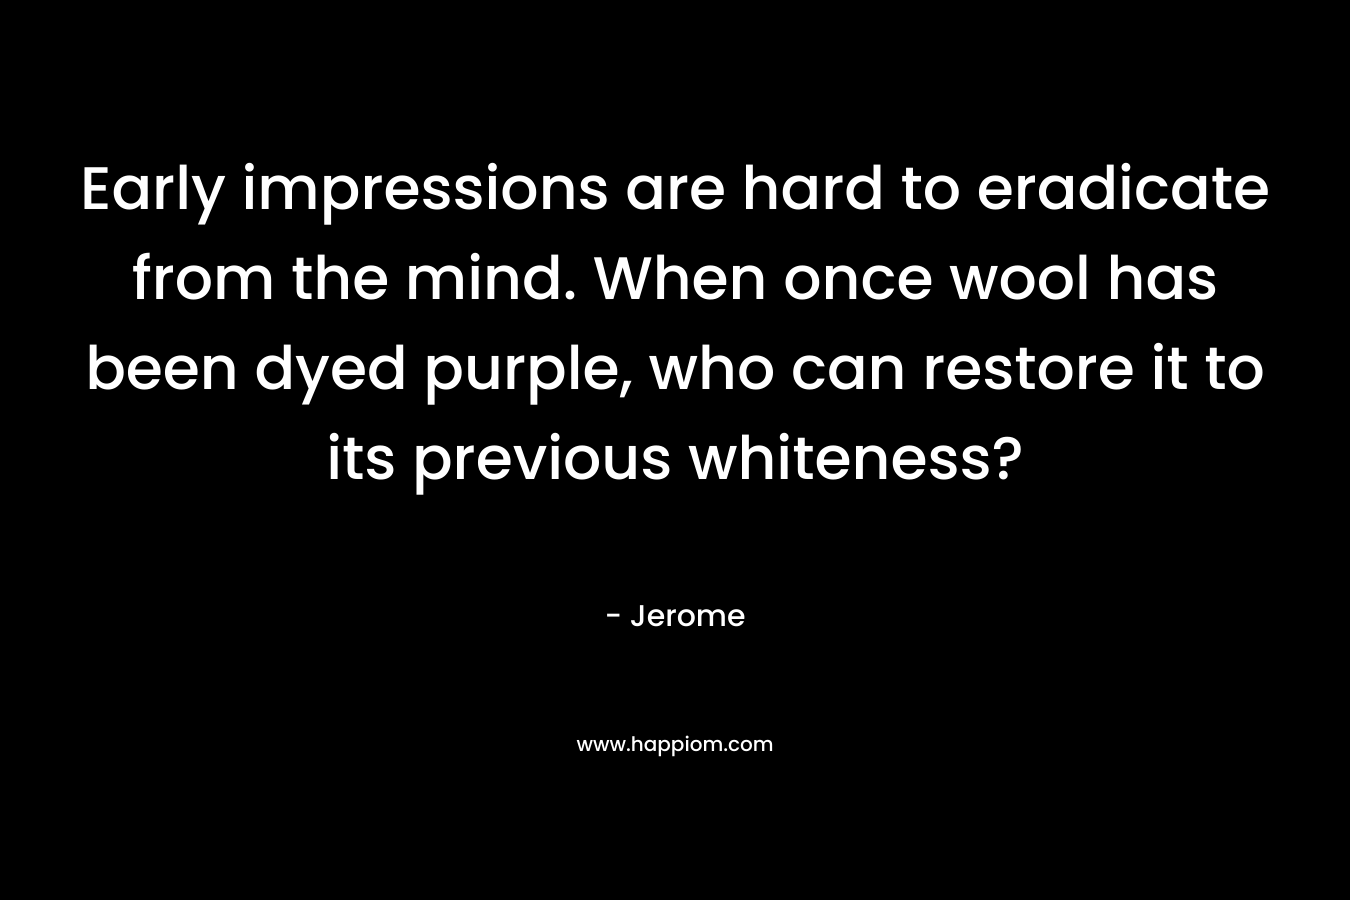 Early impressions are hard to eradicate from the mind. When once wool has been dyed purple, who can restore it to its previous whiteness? – Jerome